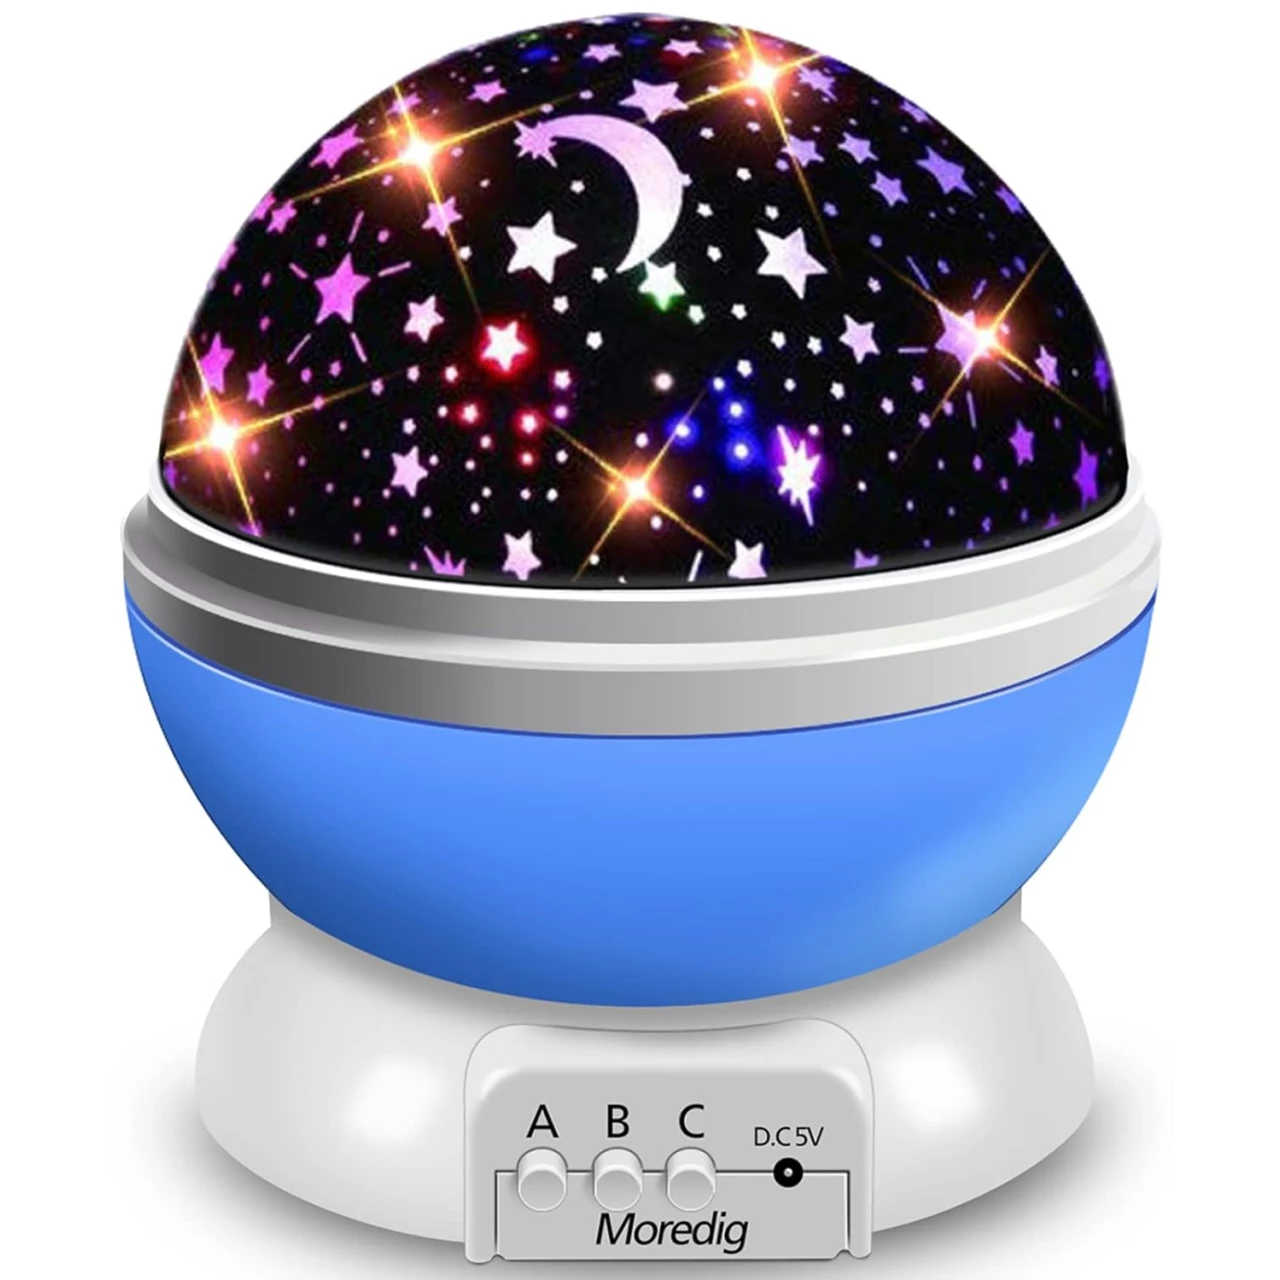 Moredig Baby Projector Night Light, Rotating Baby Light Projector, Star Night Lights Projector for Kids Room, Kids Night Light with 8 Color Changing Gifts for Baby Kids - Blue